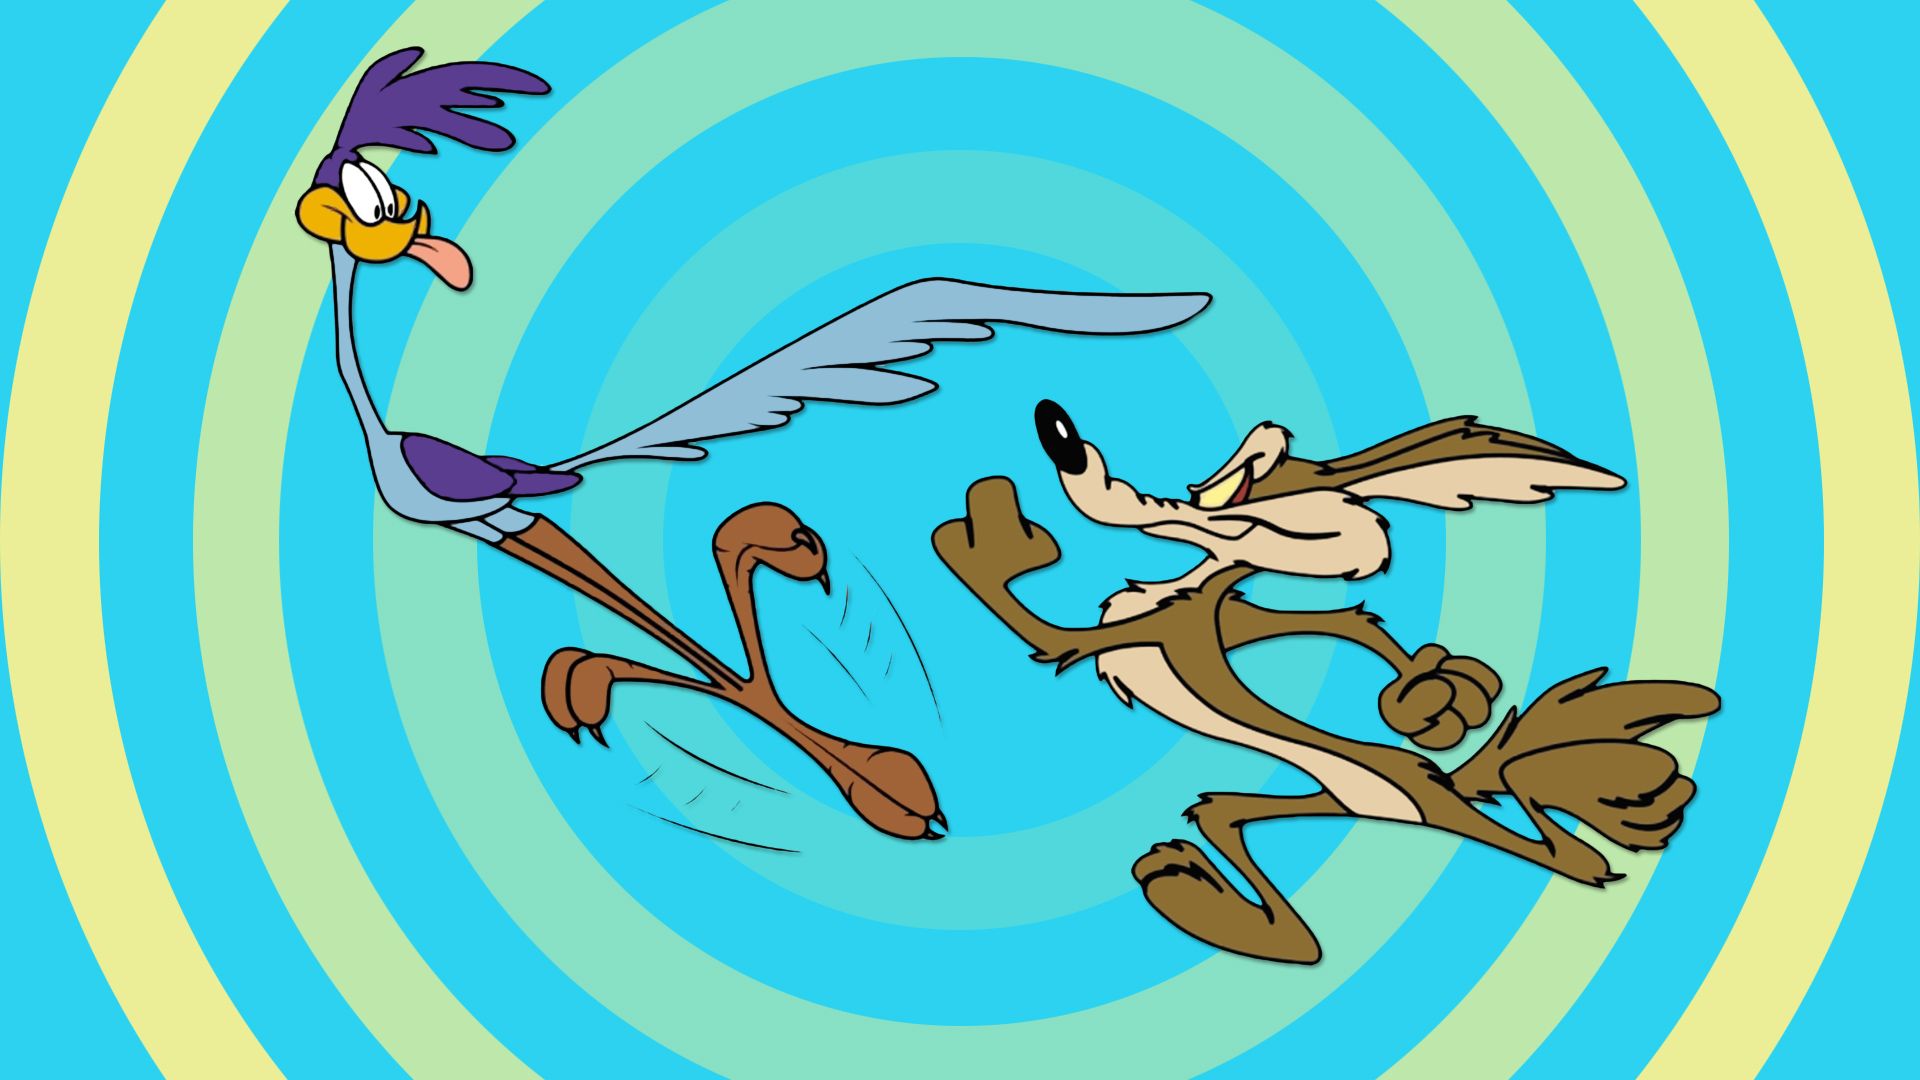 Wile Coyote Wallpaper. Coyote Ugly